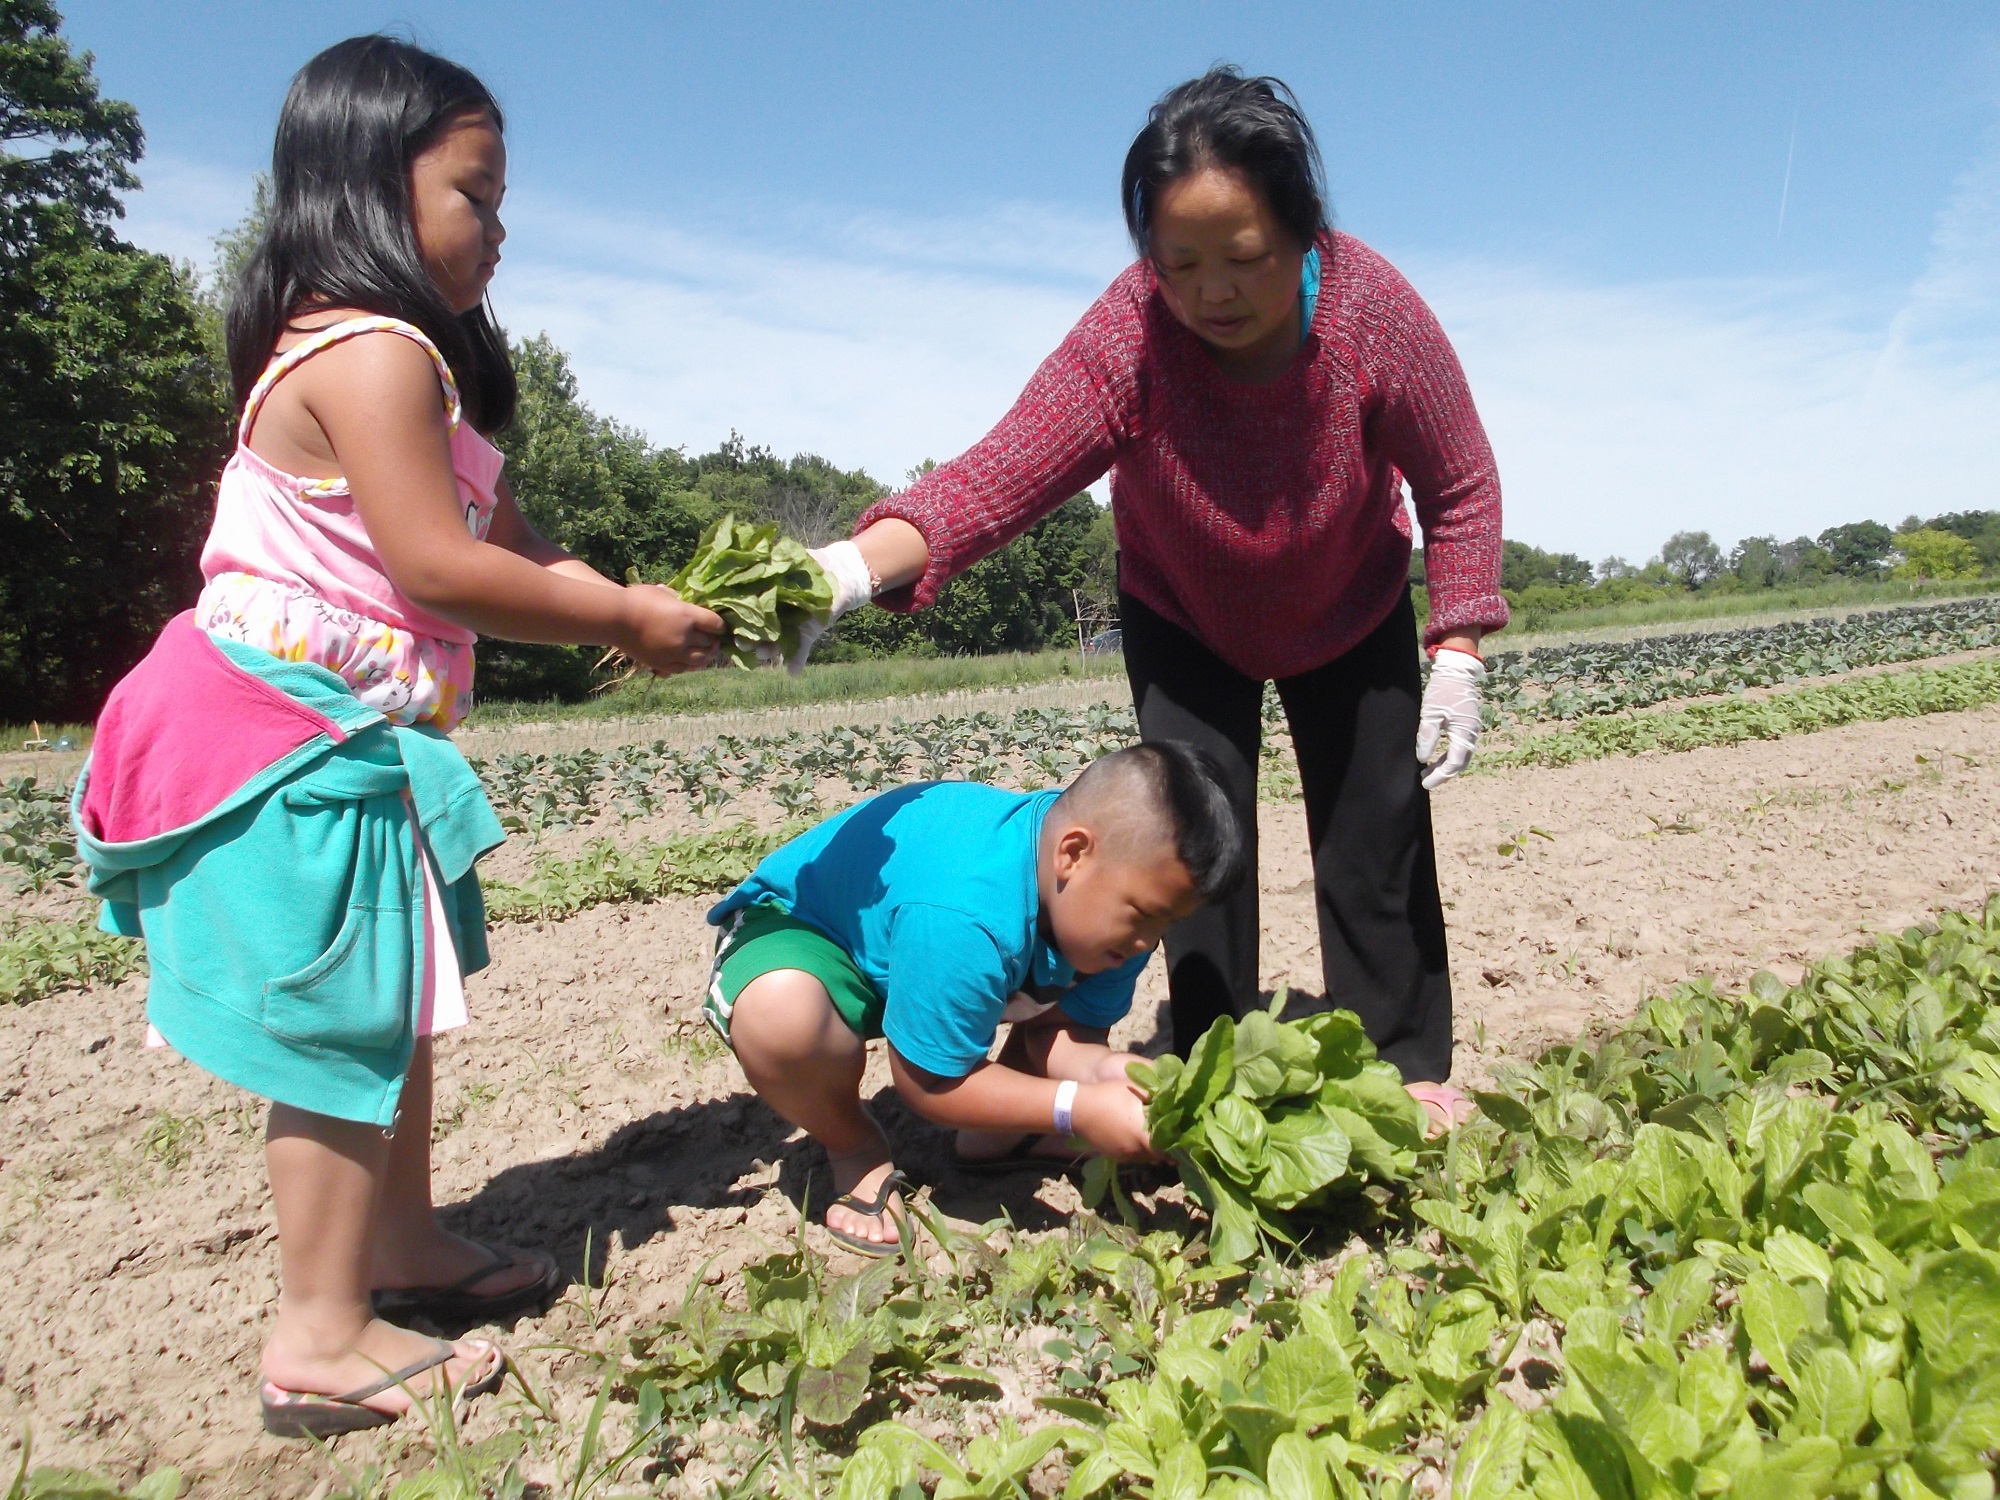 Writer Yia Lor's family work together at their garden. (l-r) Her niece, Kiana Her, nephew, Dontae Her, and mom, Lisa Chue Thao, gather veggies. (Photo by Yia Lor)